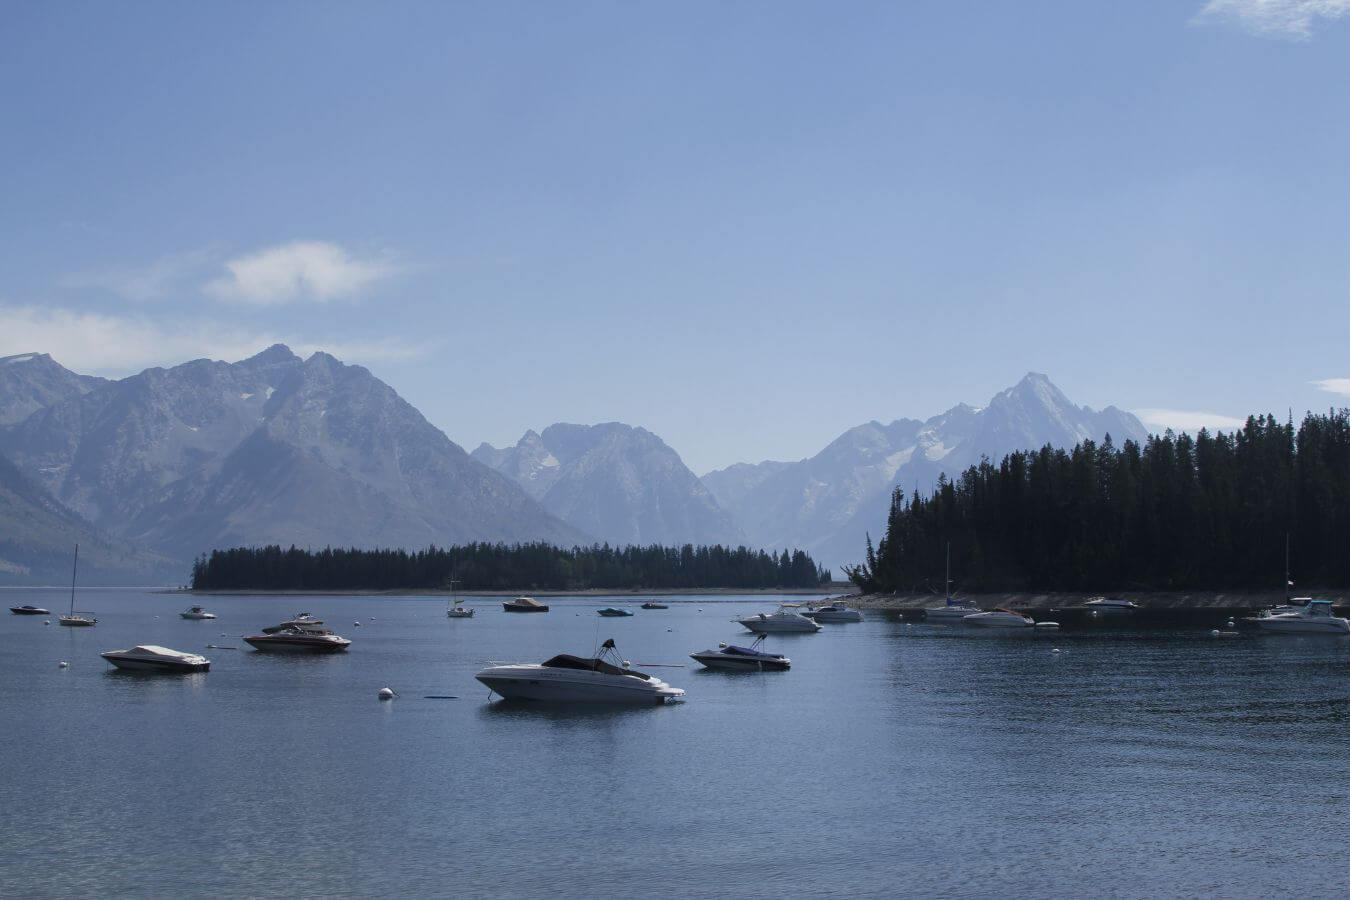 A peaceful lake in Montana with multiple boats floating on its surface, surrounded by majestic, forest-covered mountains under a clear blue sky.